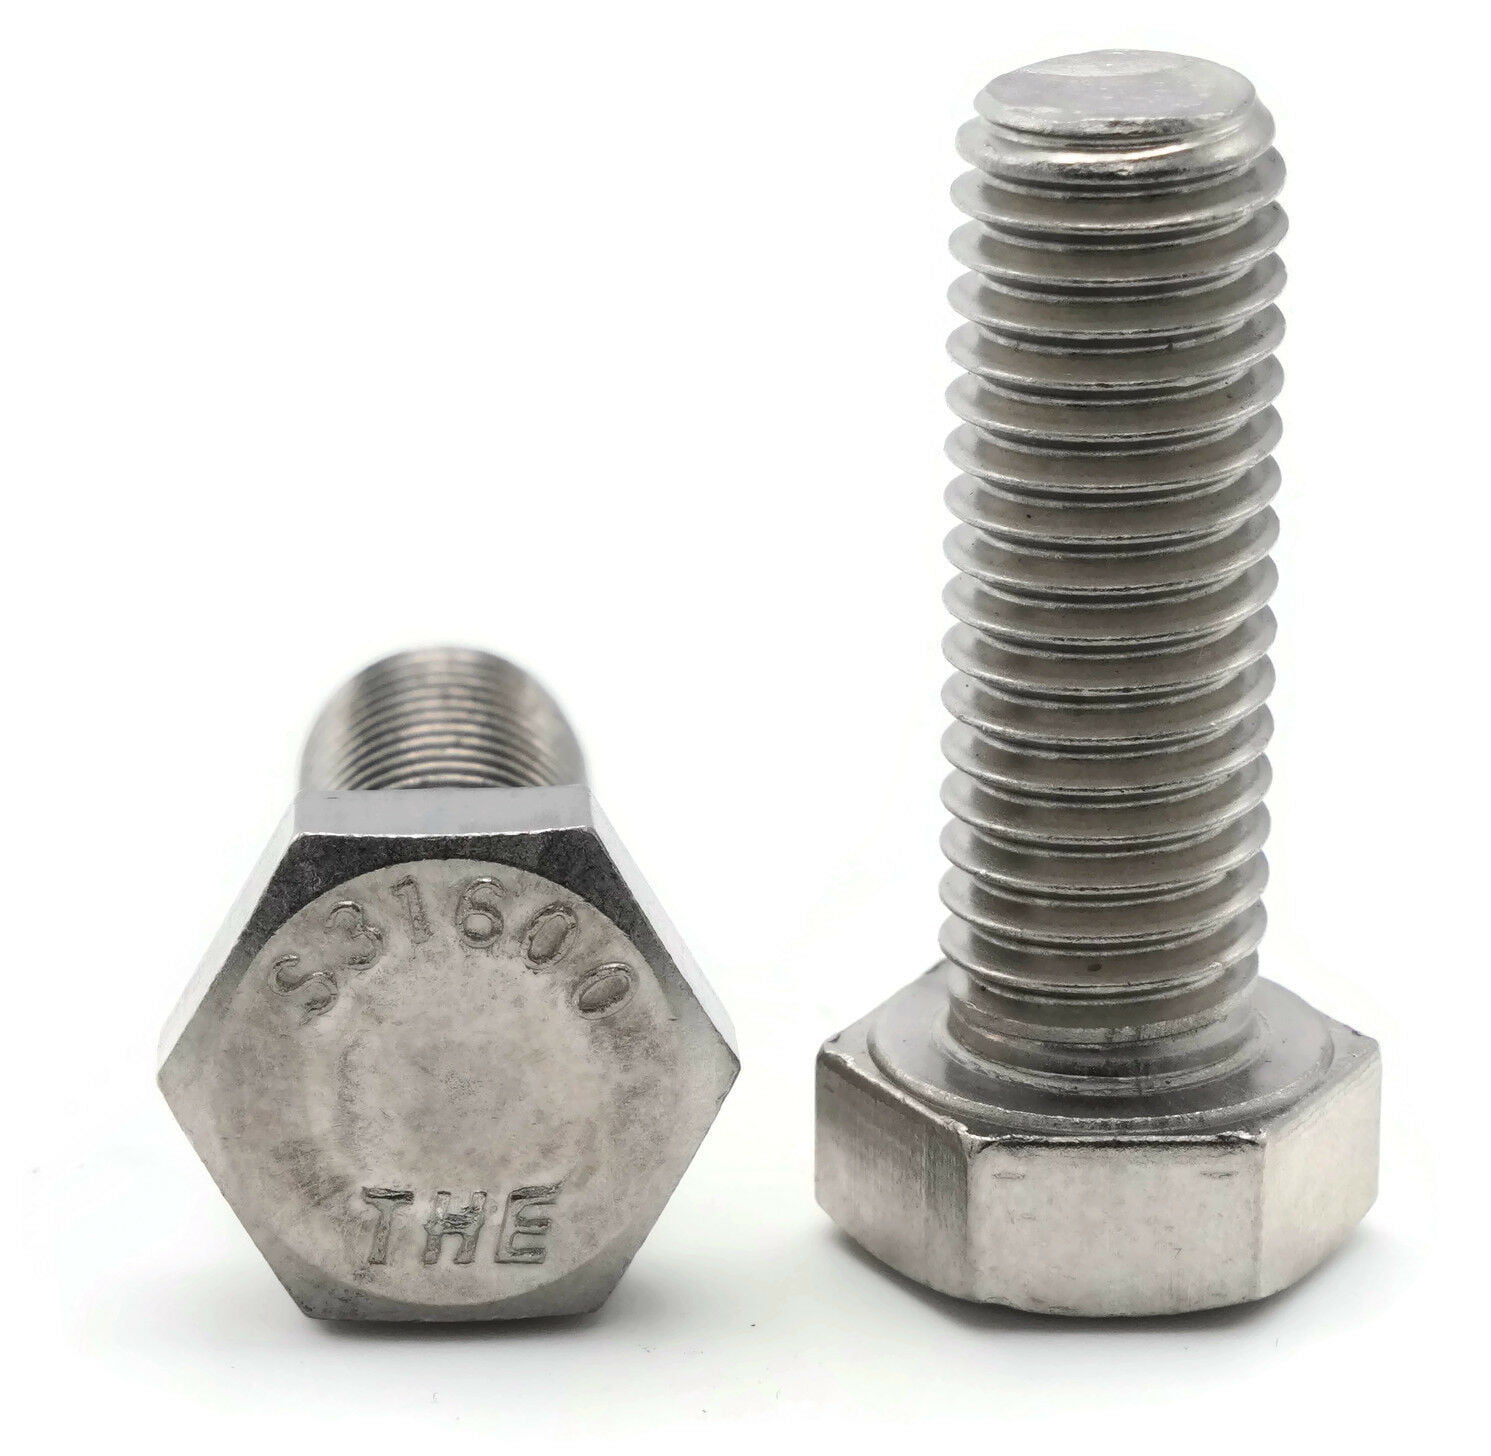 25 Bolts 1/2-13 x 1-1/2" Stainless Steel Hex Head Cap Screws Qty 